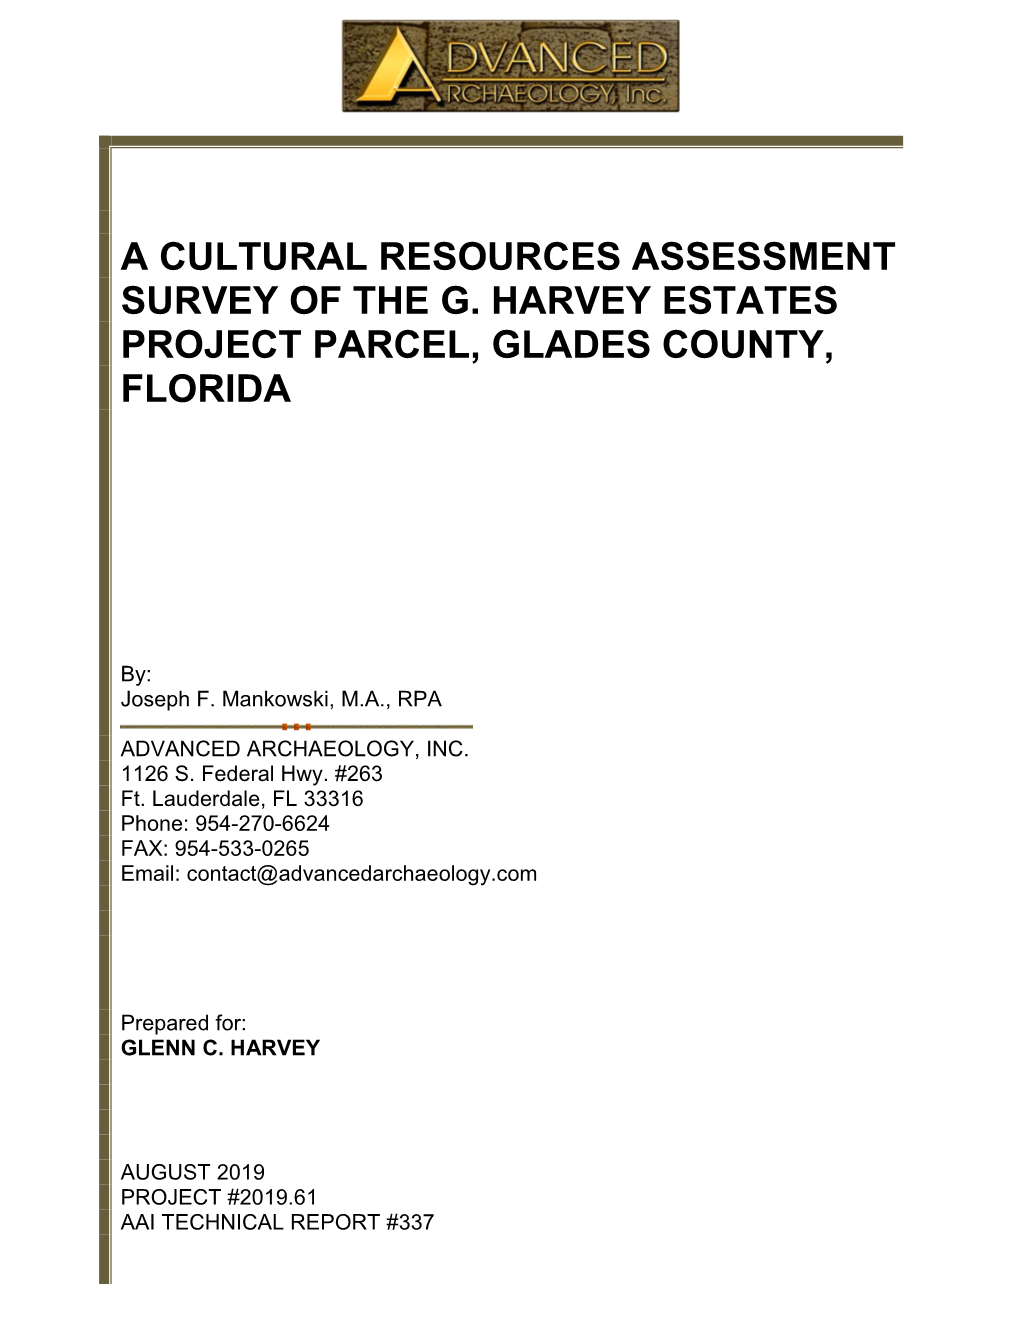 A Cultural Resources Assessment Survey of the G